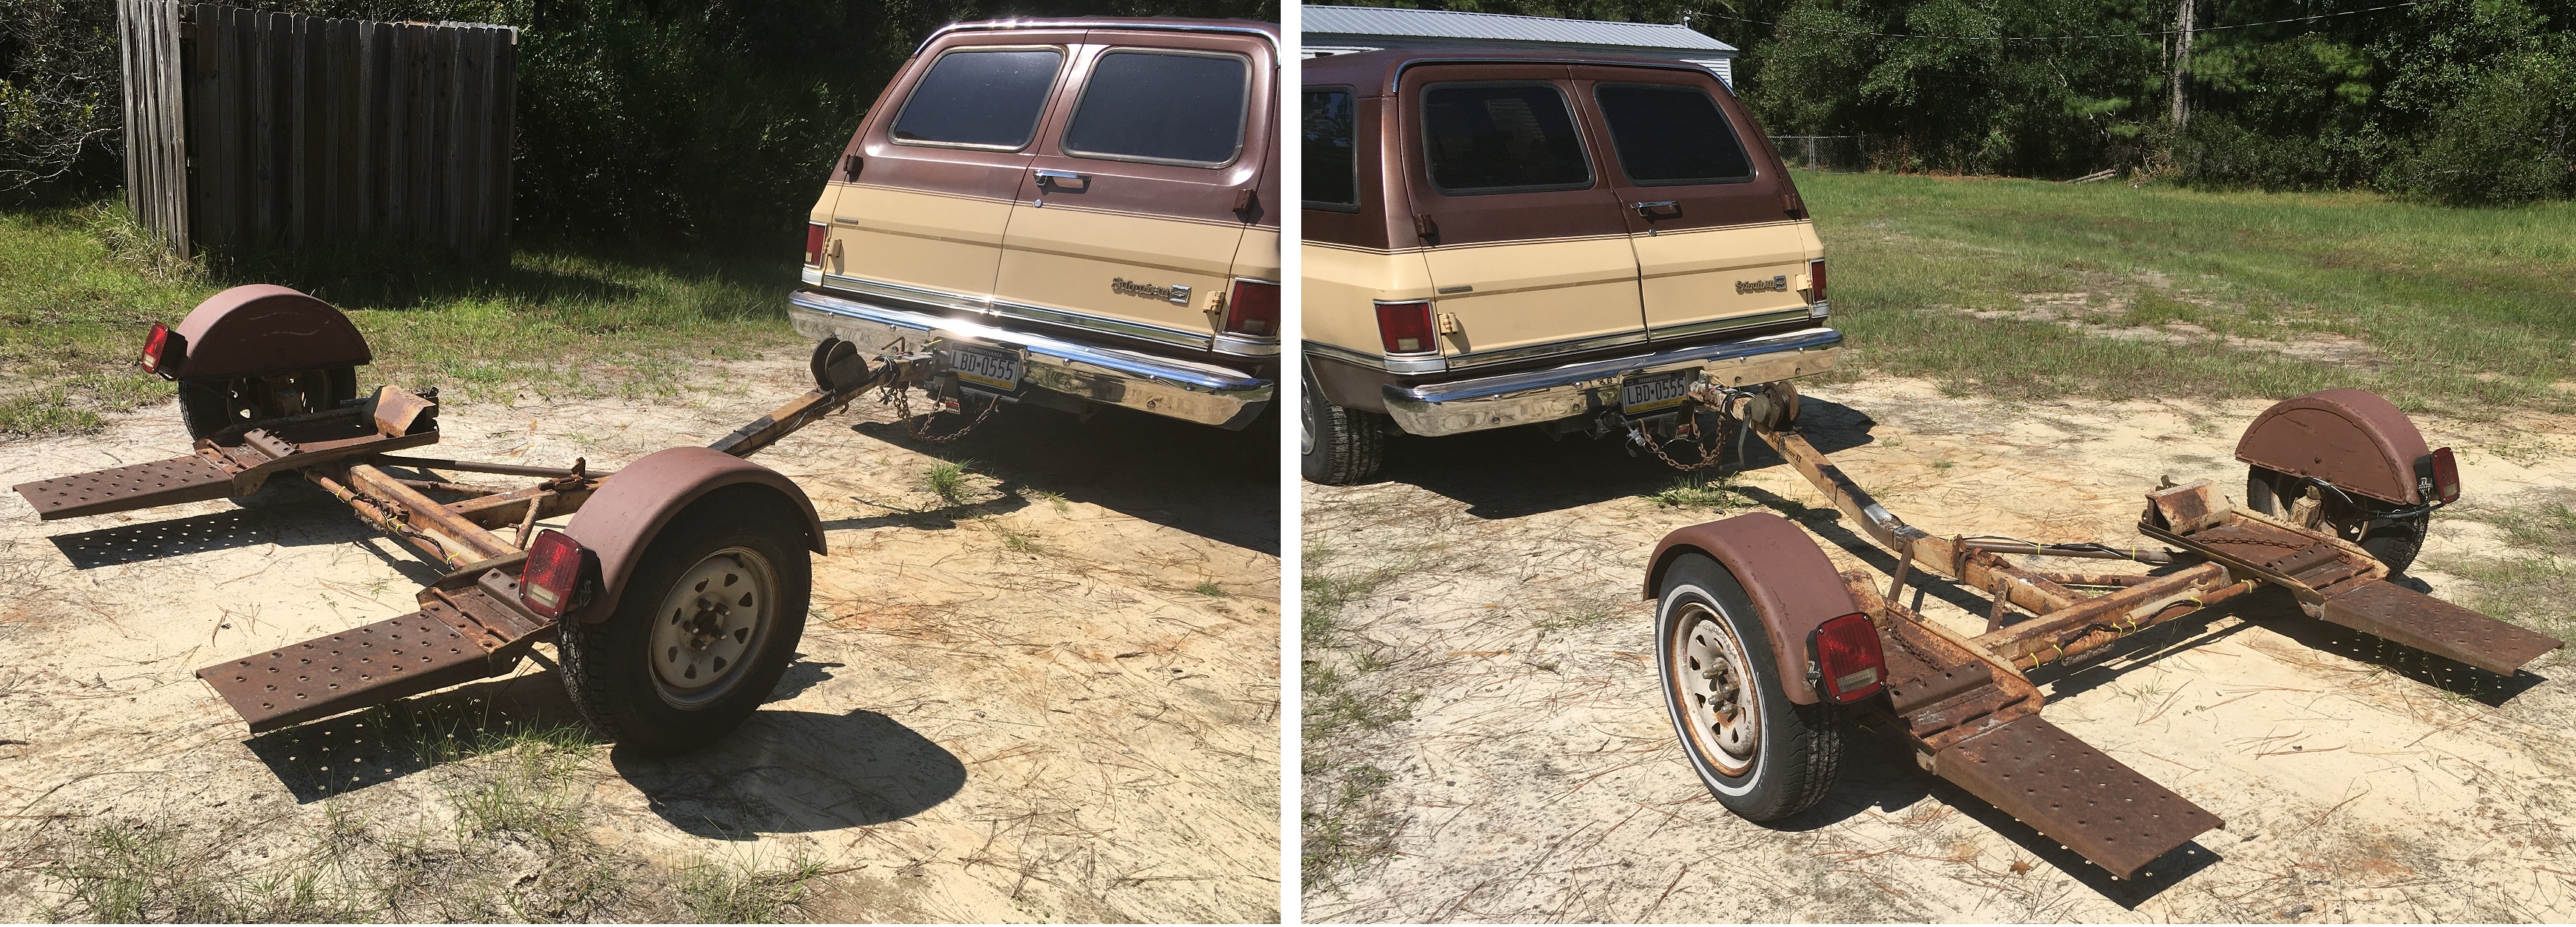 1988 Chevrolet Suburban with tow dolly